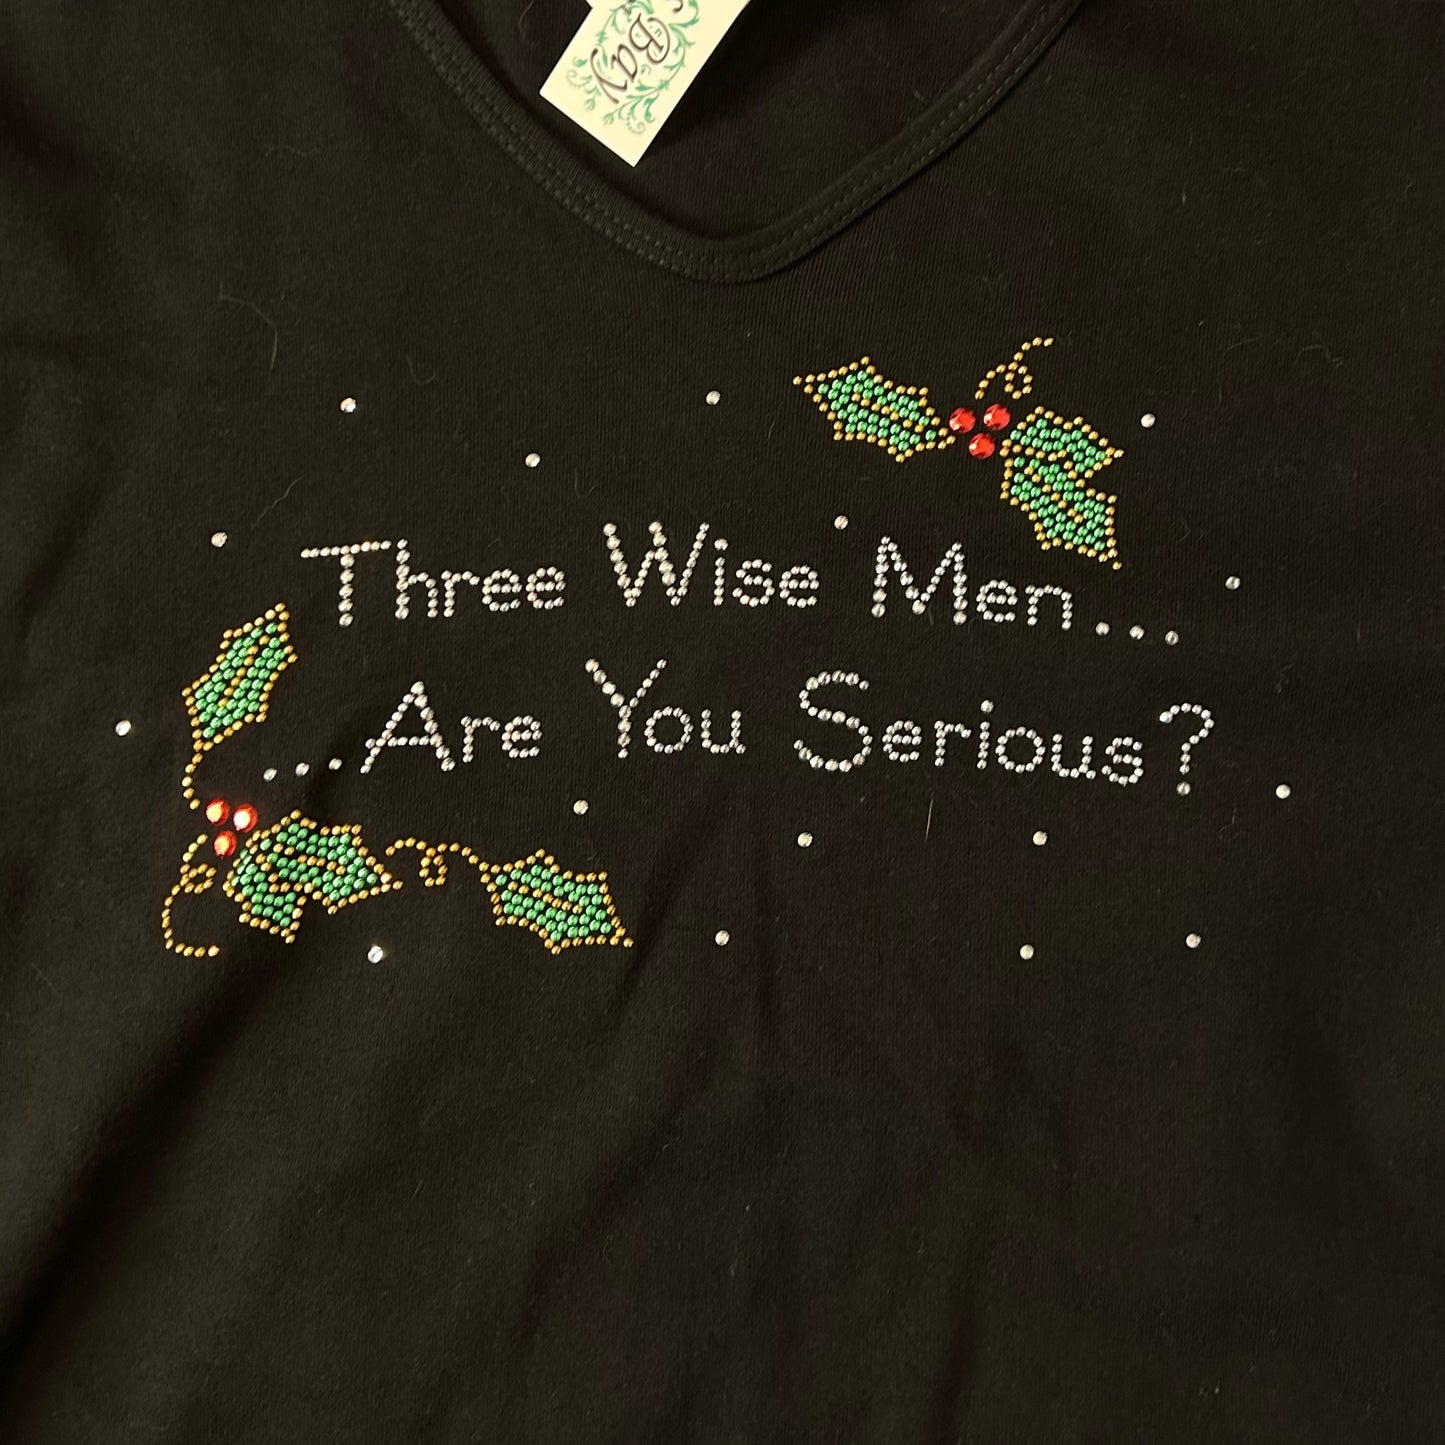 “ Three wise men.. are you serious ? “